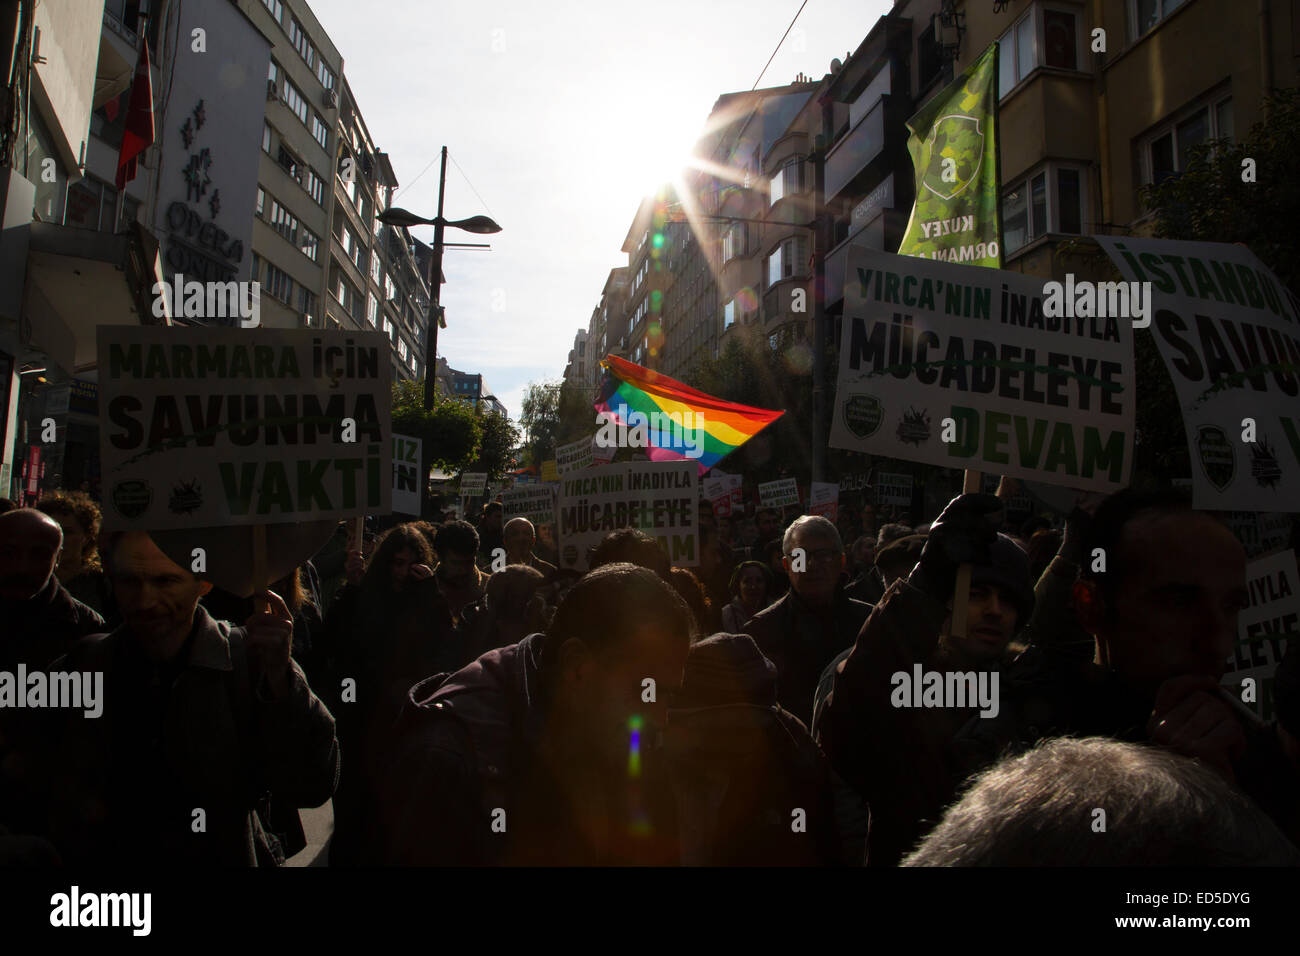 Kadikoy, Istanbul, Turkey. 28th Dec, 2014. Thousands gather in Kadikoy from around the country to protest against widespread environmental destruction due to urbanization. Despite a ban on Kadikoy for any protest, the demonstrators refused to change their original plan, and with widespread participation, the protest carried on peacefully. Photo by Bikem Ekberzade/Alamy Live News Stock Photo